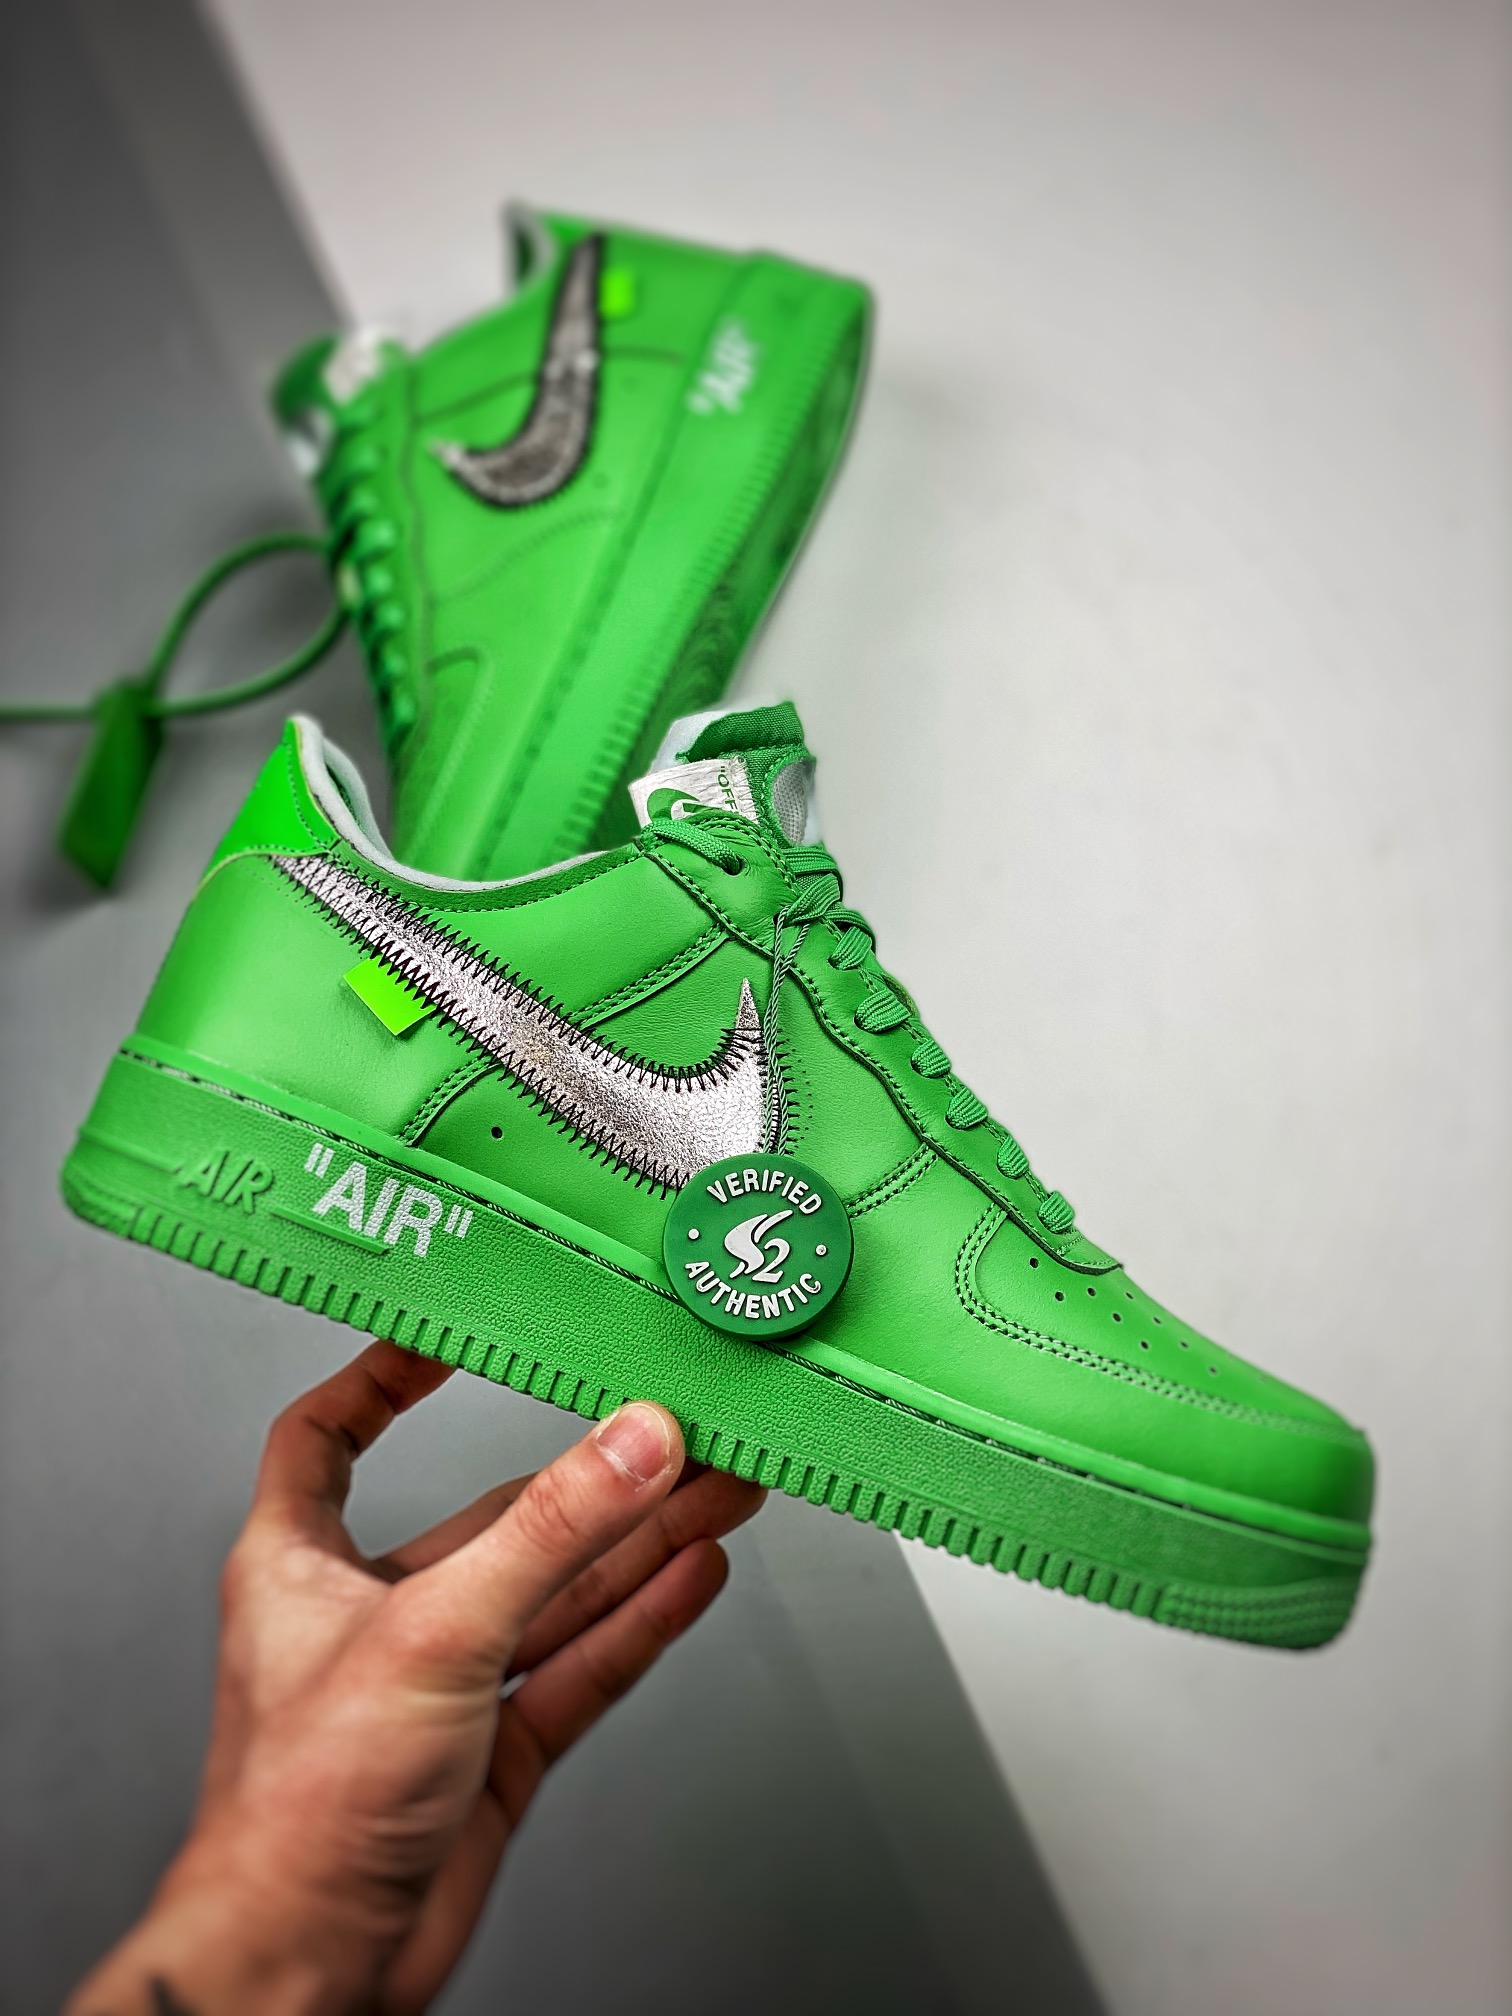 Nike Air Force 1 Low Off-White Spark Green Brooklyn Slime DX1419 300 Sz 14